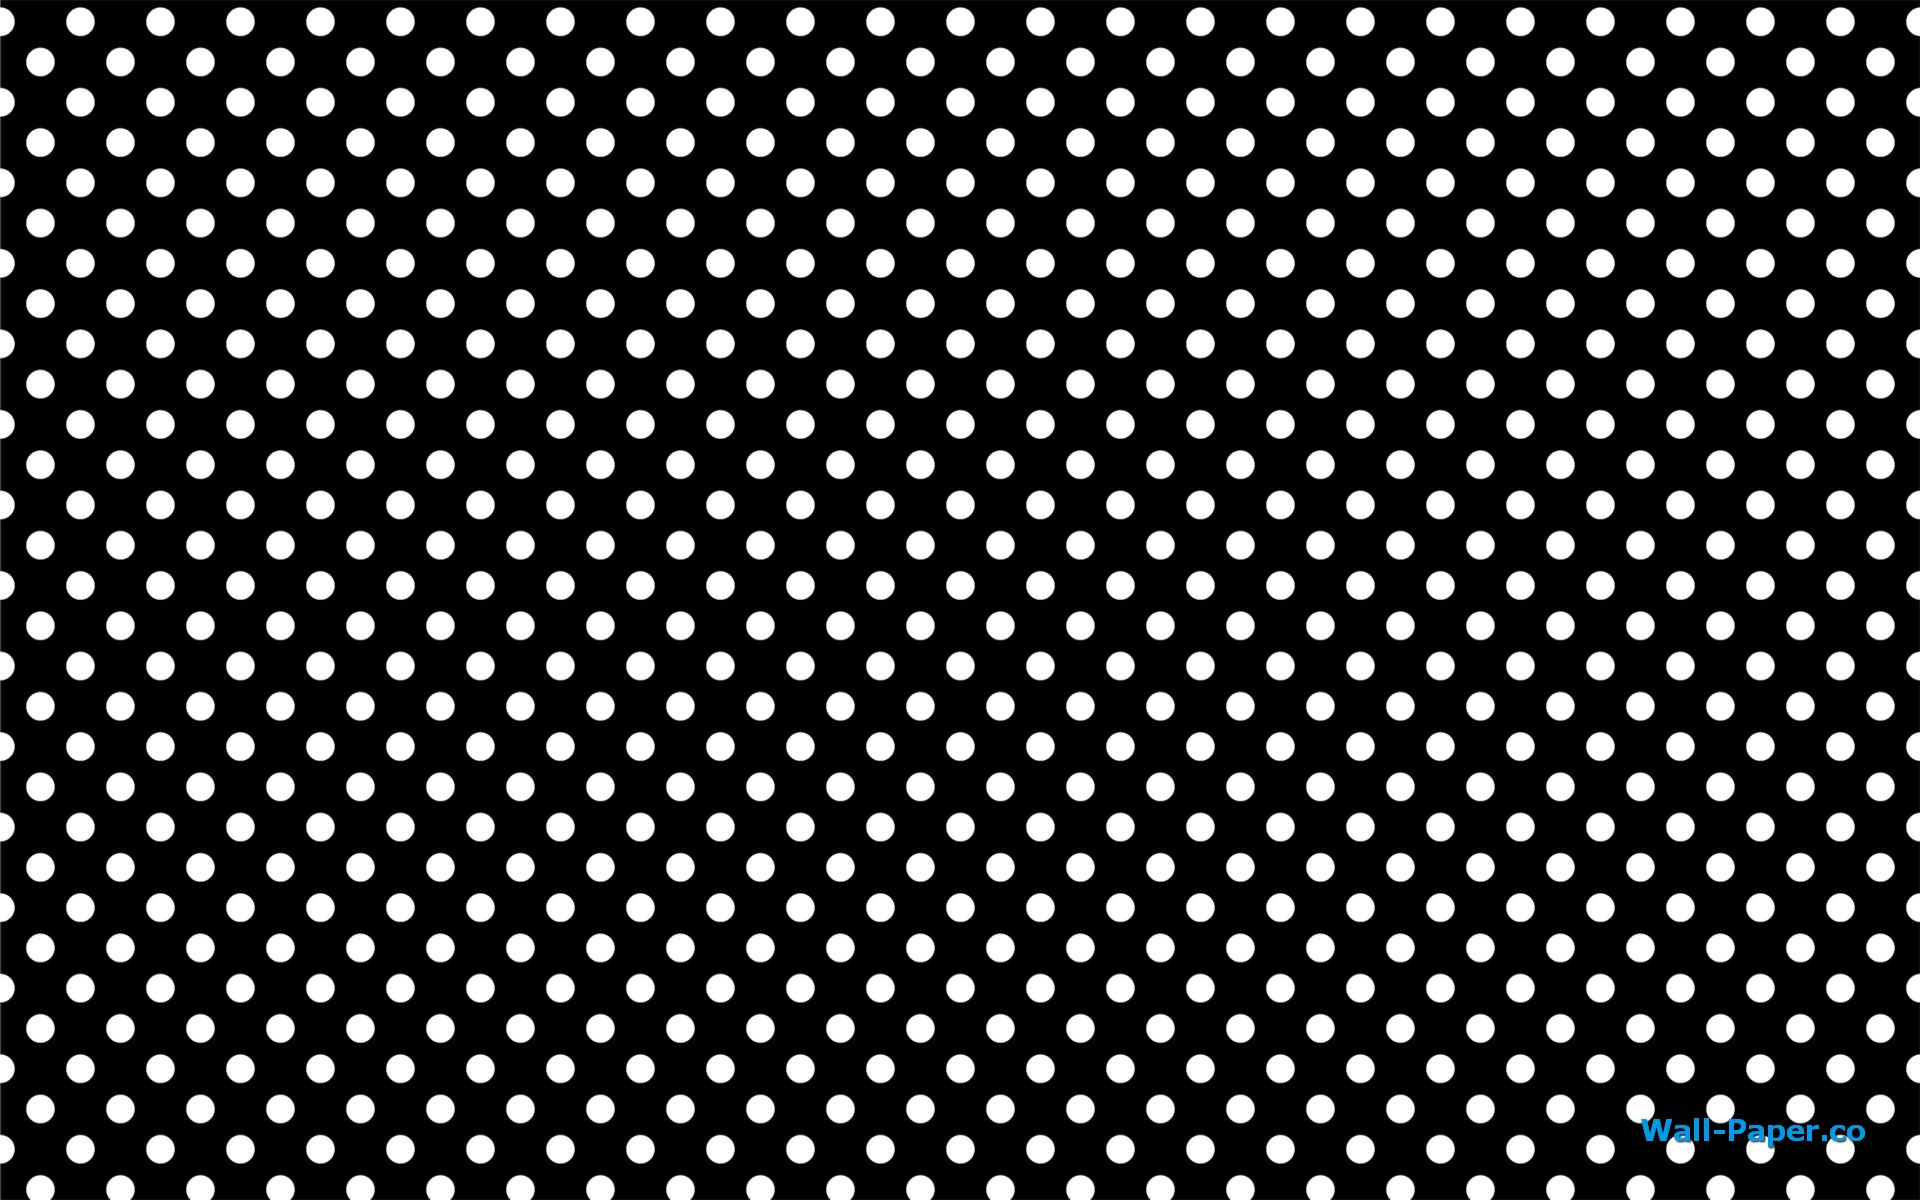 Polka Dot Wallpaper Best And Fine Collection Of HD In